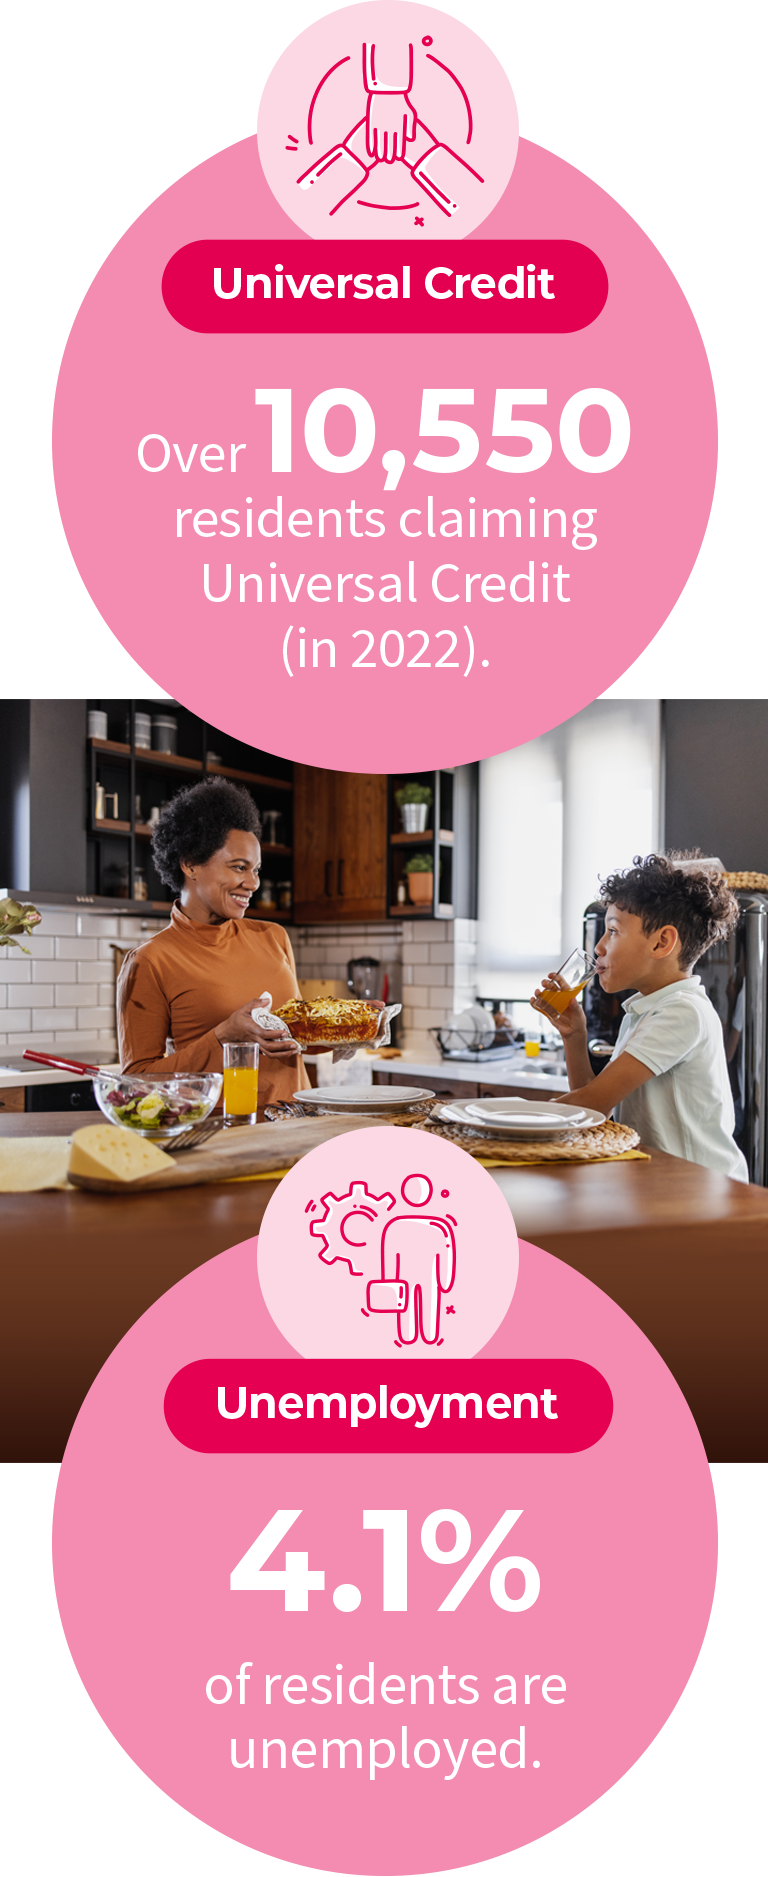 A large graphic with a photo of a family sitting at a dining table having dinner. This photo is the background of the graphic. At the top of the photo is a large pink circle with white text that says “Universal Credit. Over 10,550 residents claiming Universal Credit (in 2022).” At the bottom of the photo is a large pink circle with white text that says “Unemployment. 4.1% of residents are unemployed.”